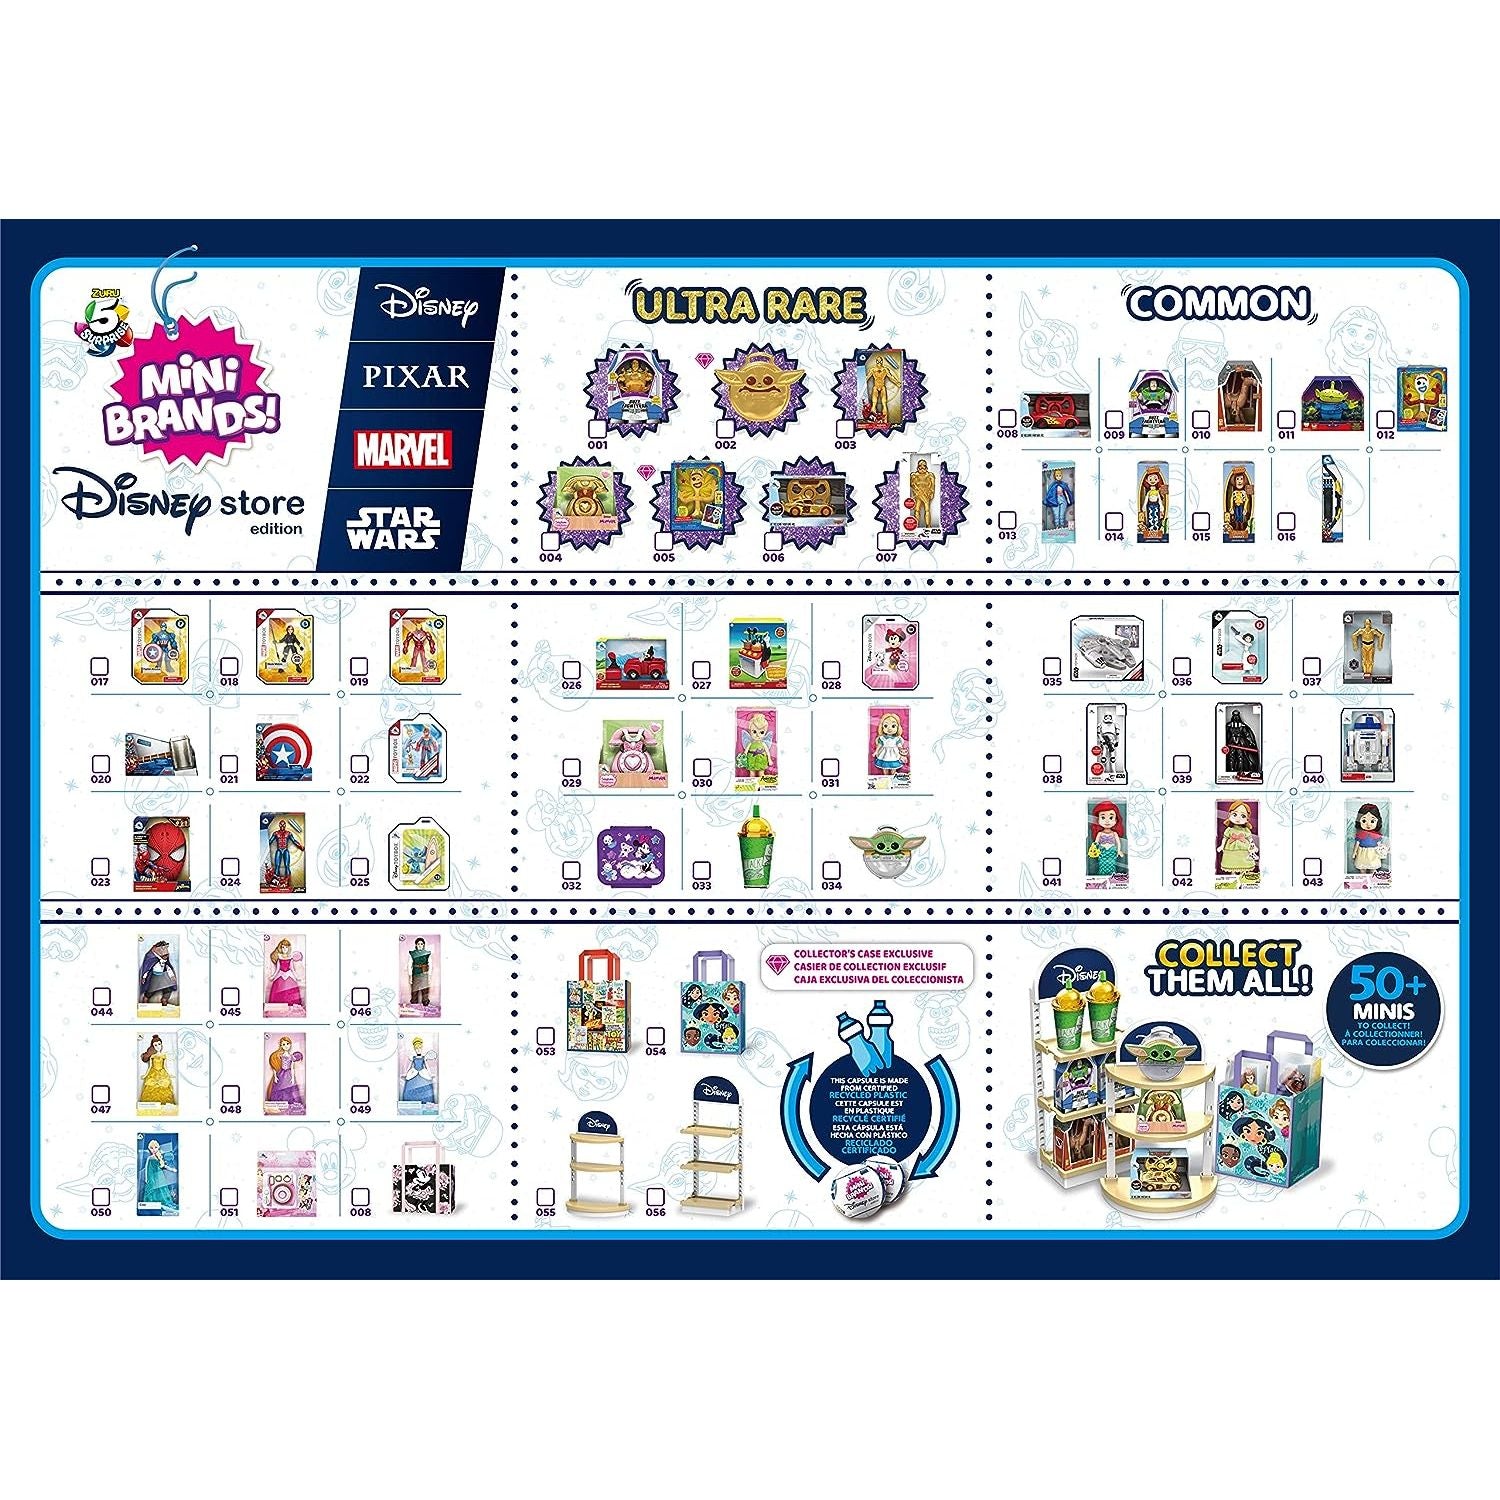 5 Surprise Mini Brands Disney Toy Store Playset by Zuru - Includes 5 Exclusive Mystery Mini's, Store and Display Mini Collectibles for Kids